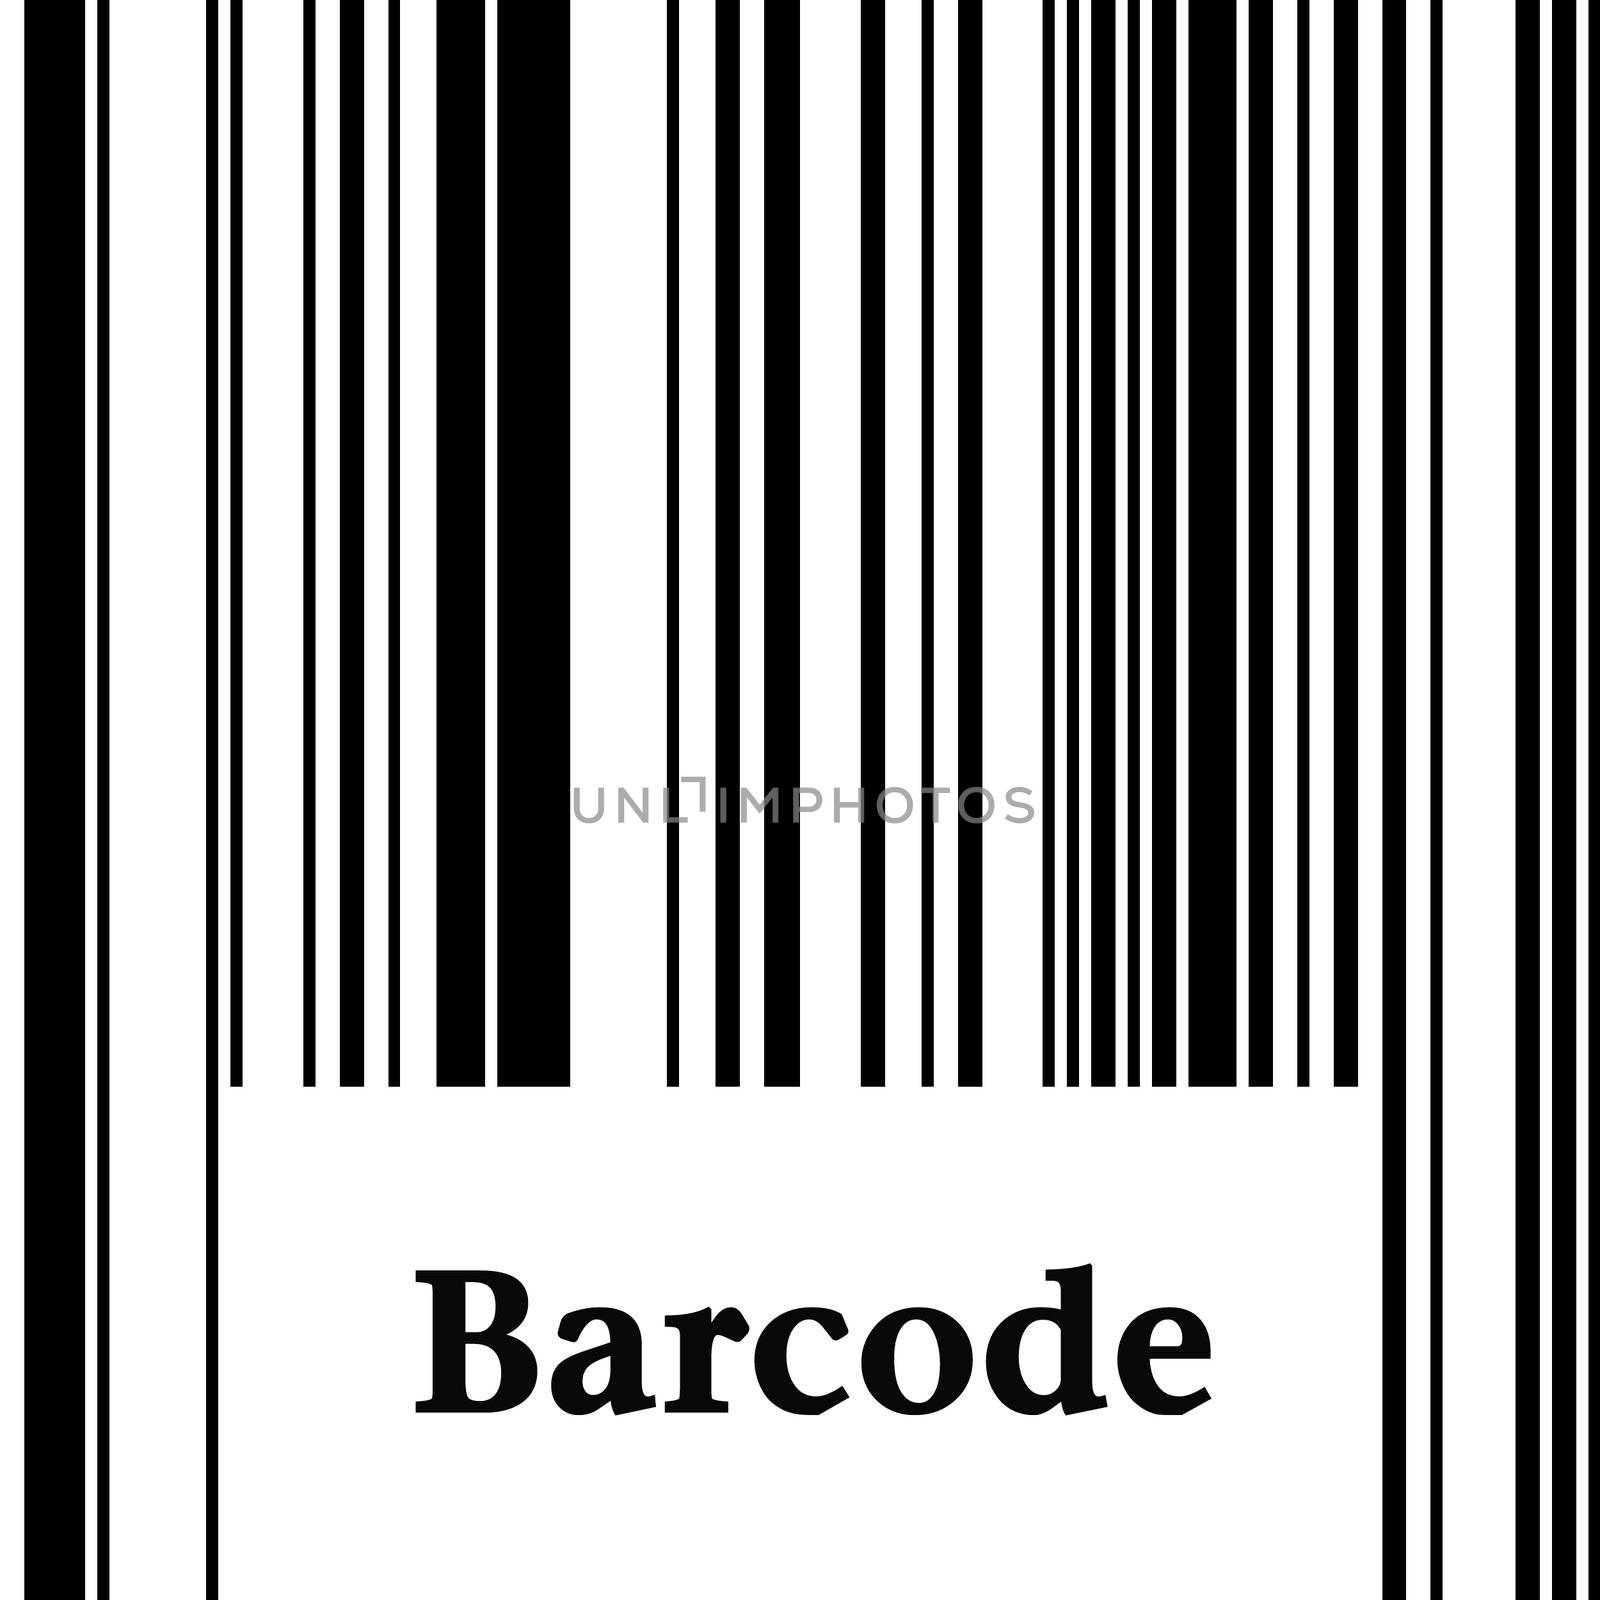 Barcode isolated in white